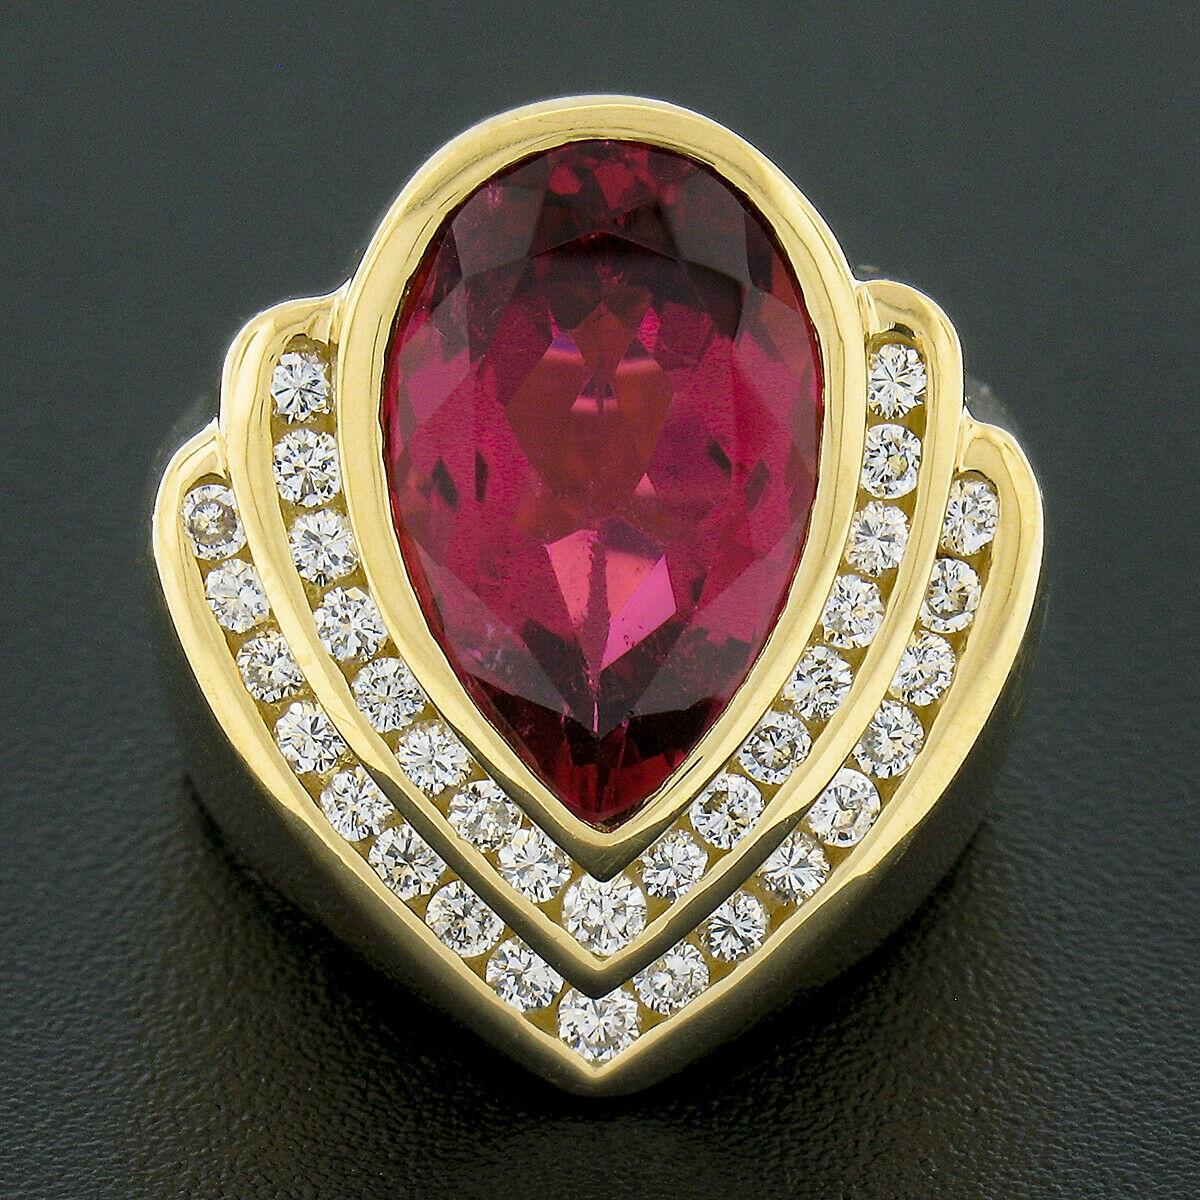 Pear Cut Charles Krypell 18k Gold 8.25ctw Pear Bezel Rubellite Diamond Cocktail Band Ring